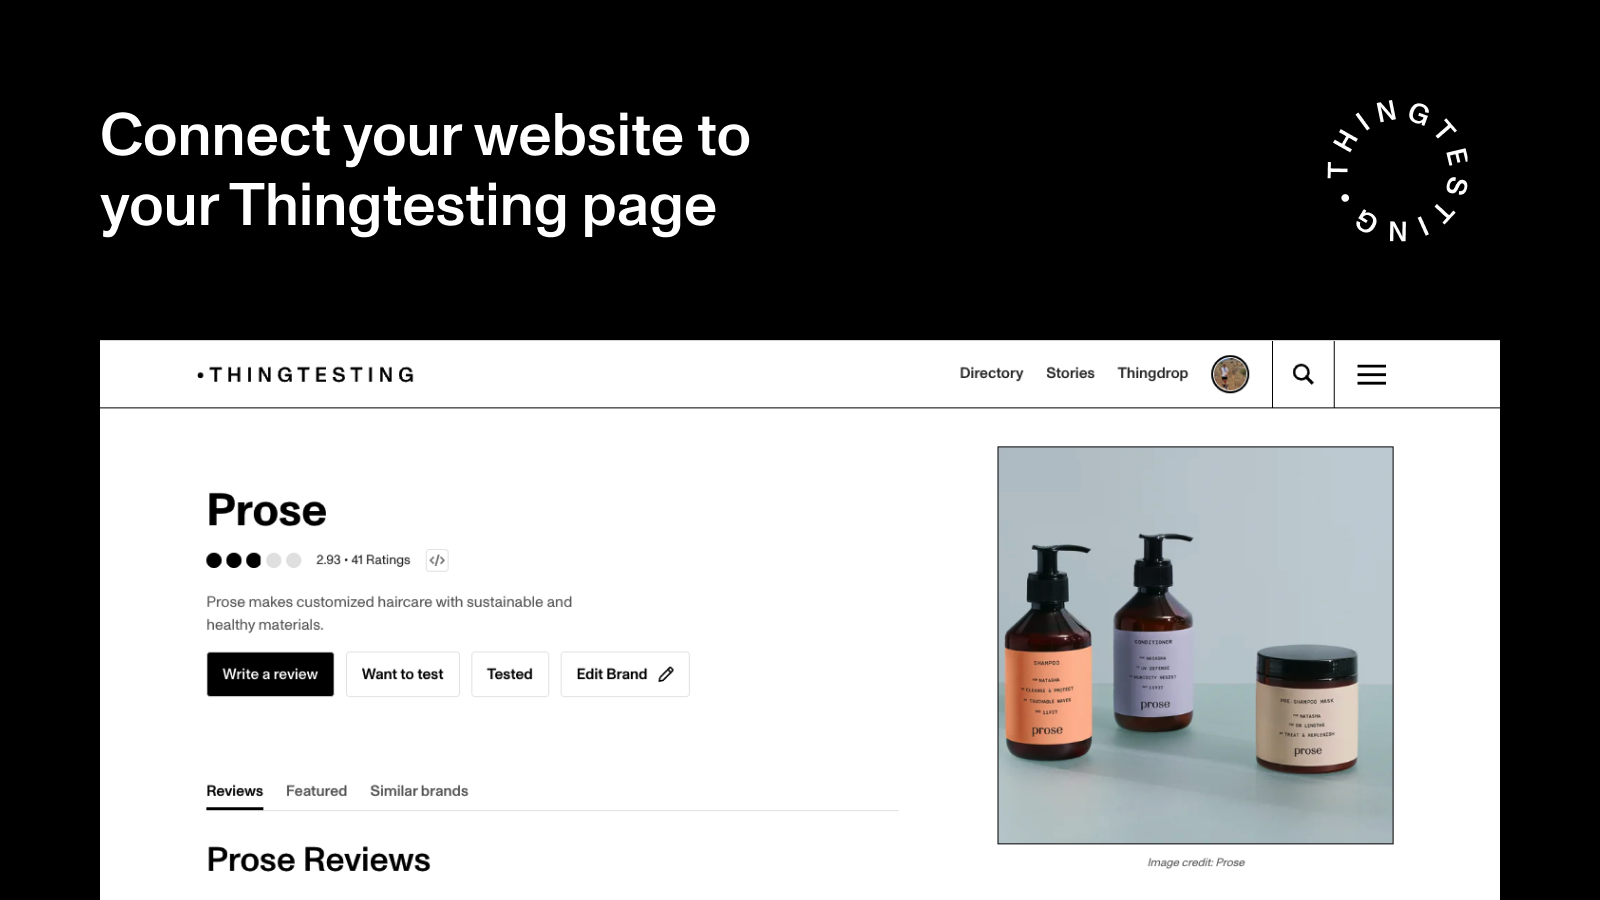 Connect your website to your Thingtesting page